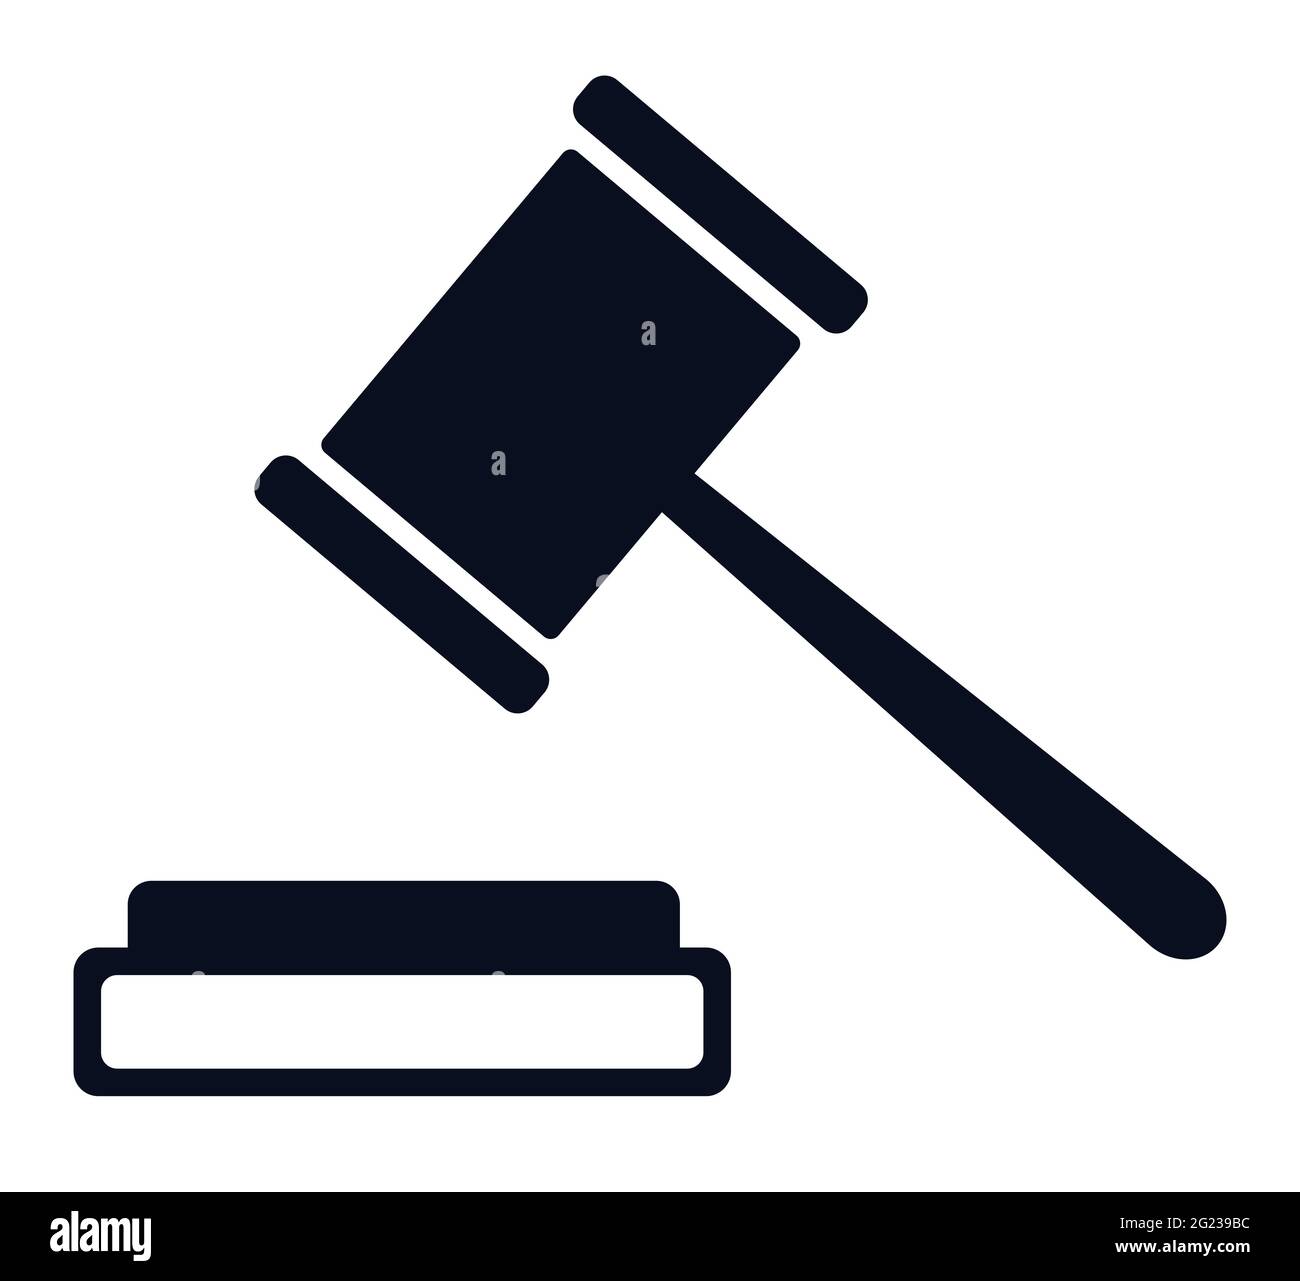 A judge court or justice gavel vector icon and hammer symbol Stock Vector